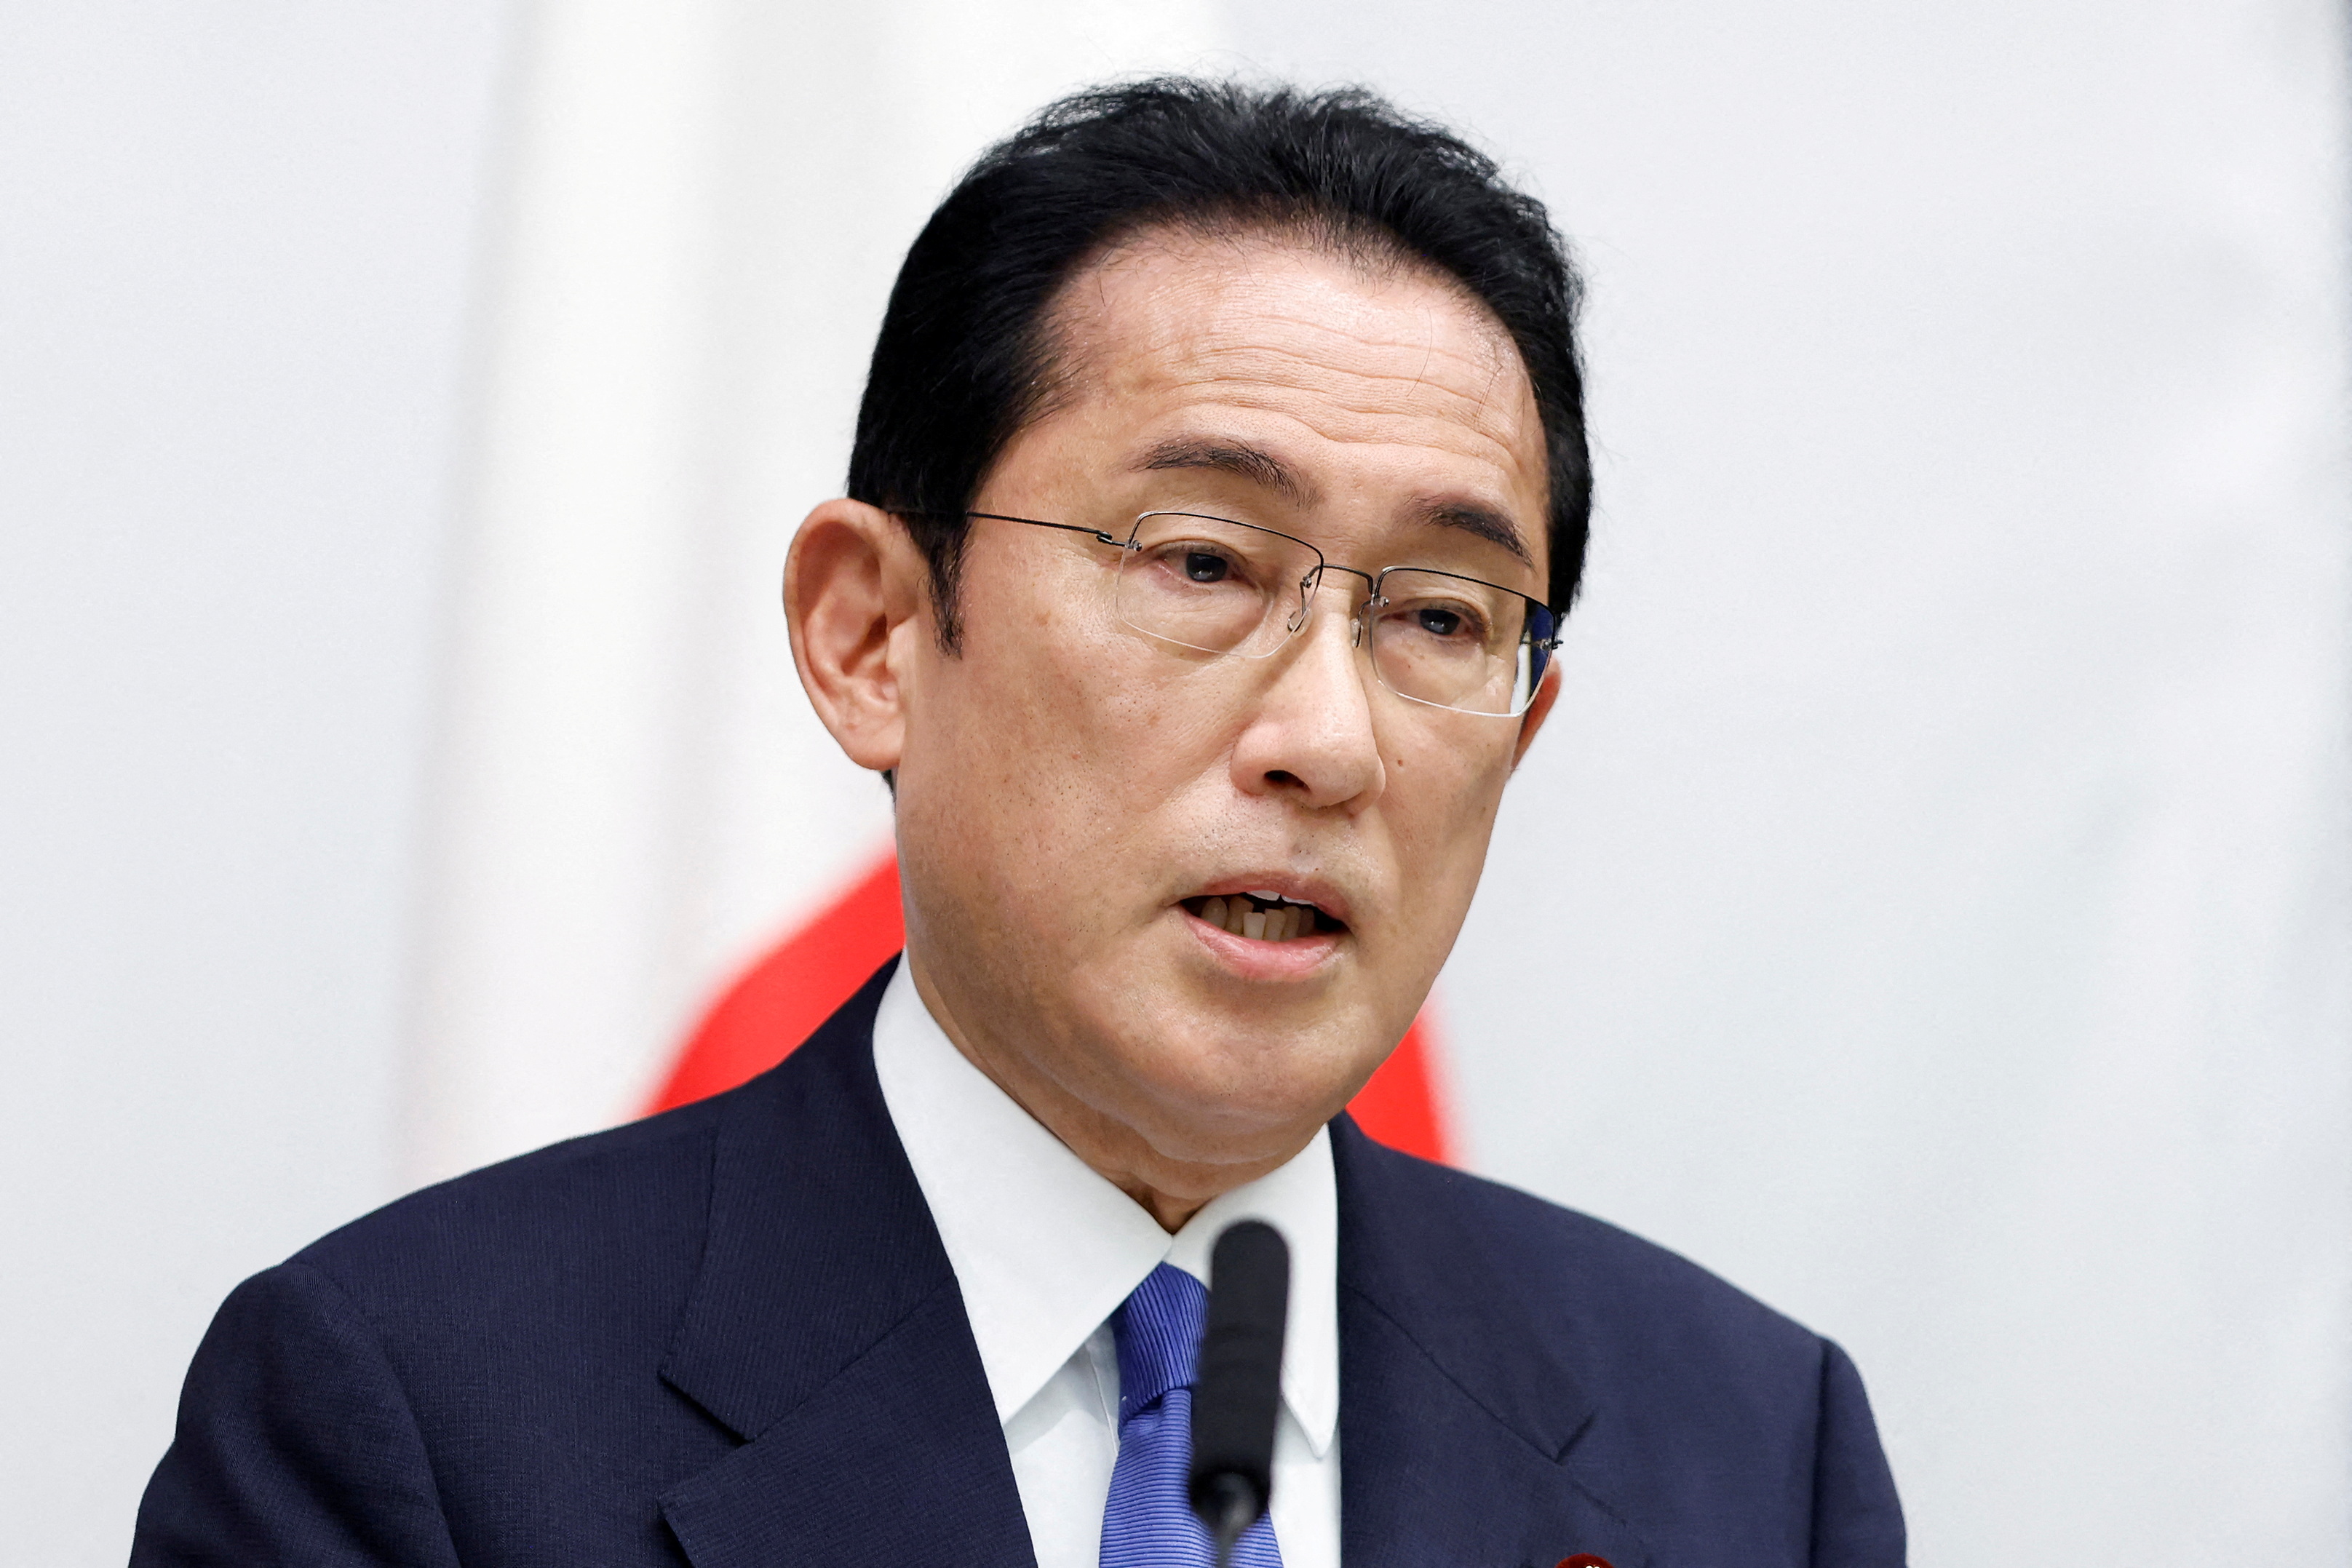 Whole nation pay for higher military spending, says Japan govt